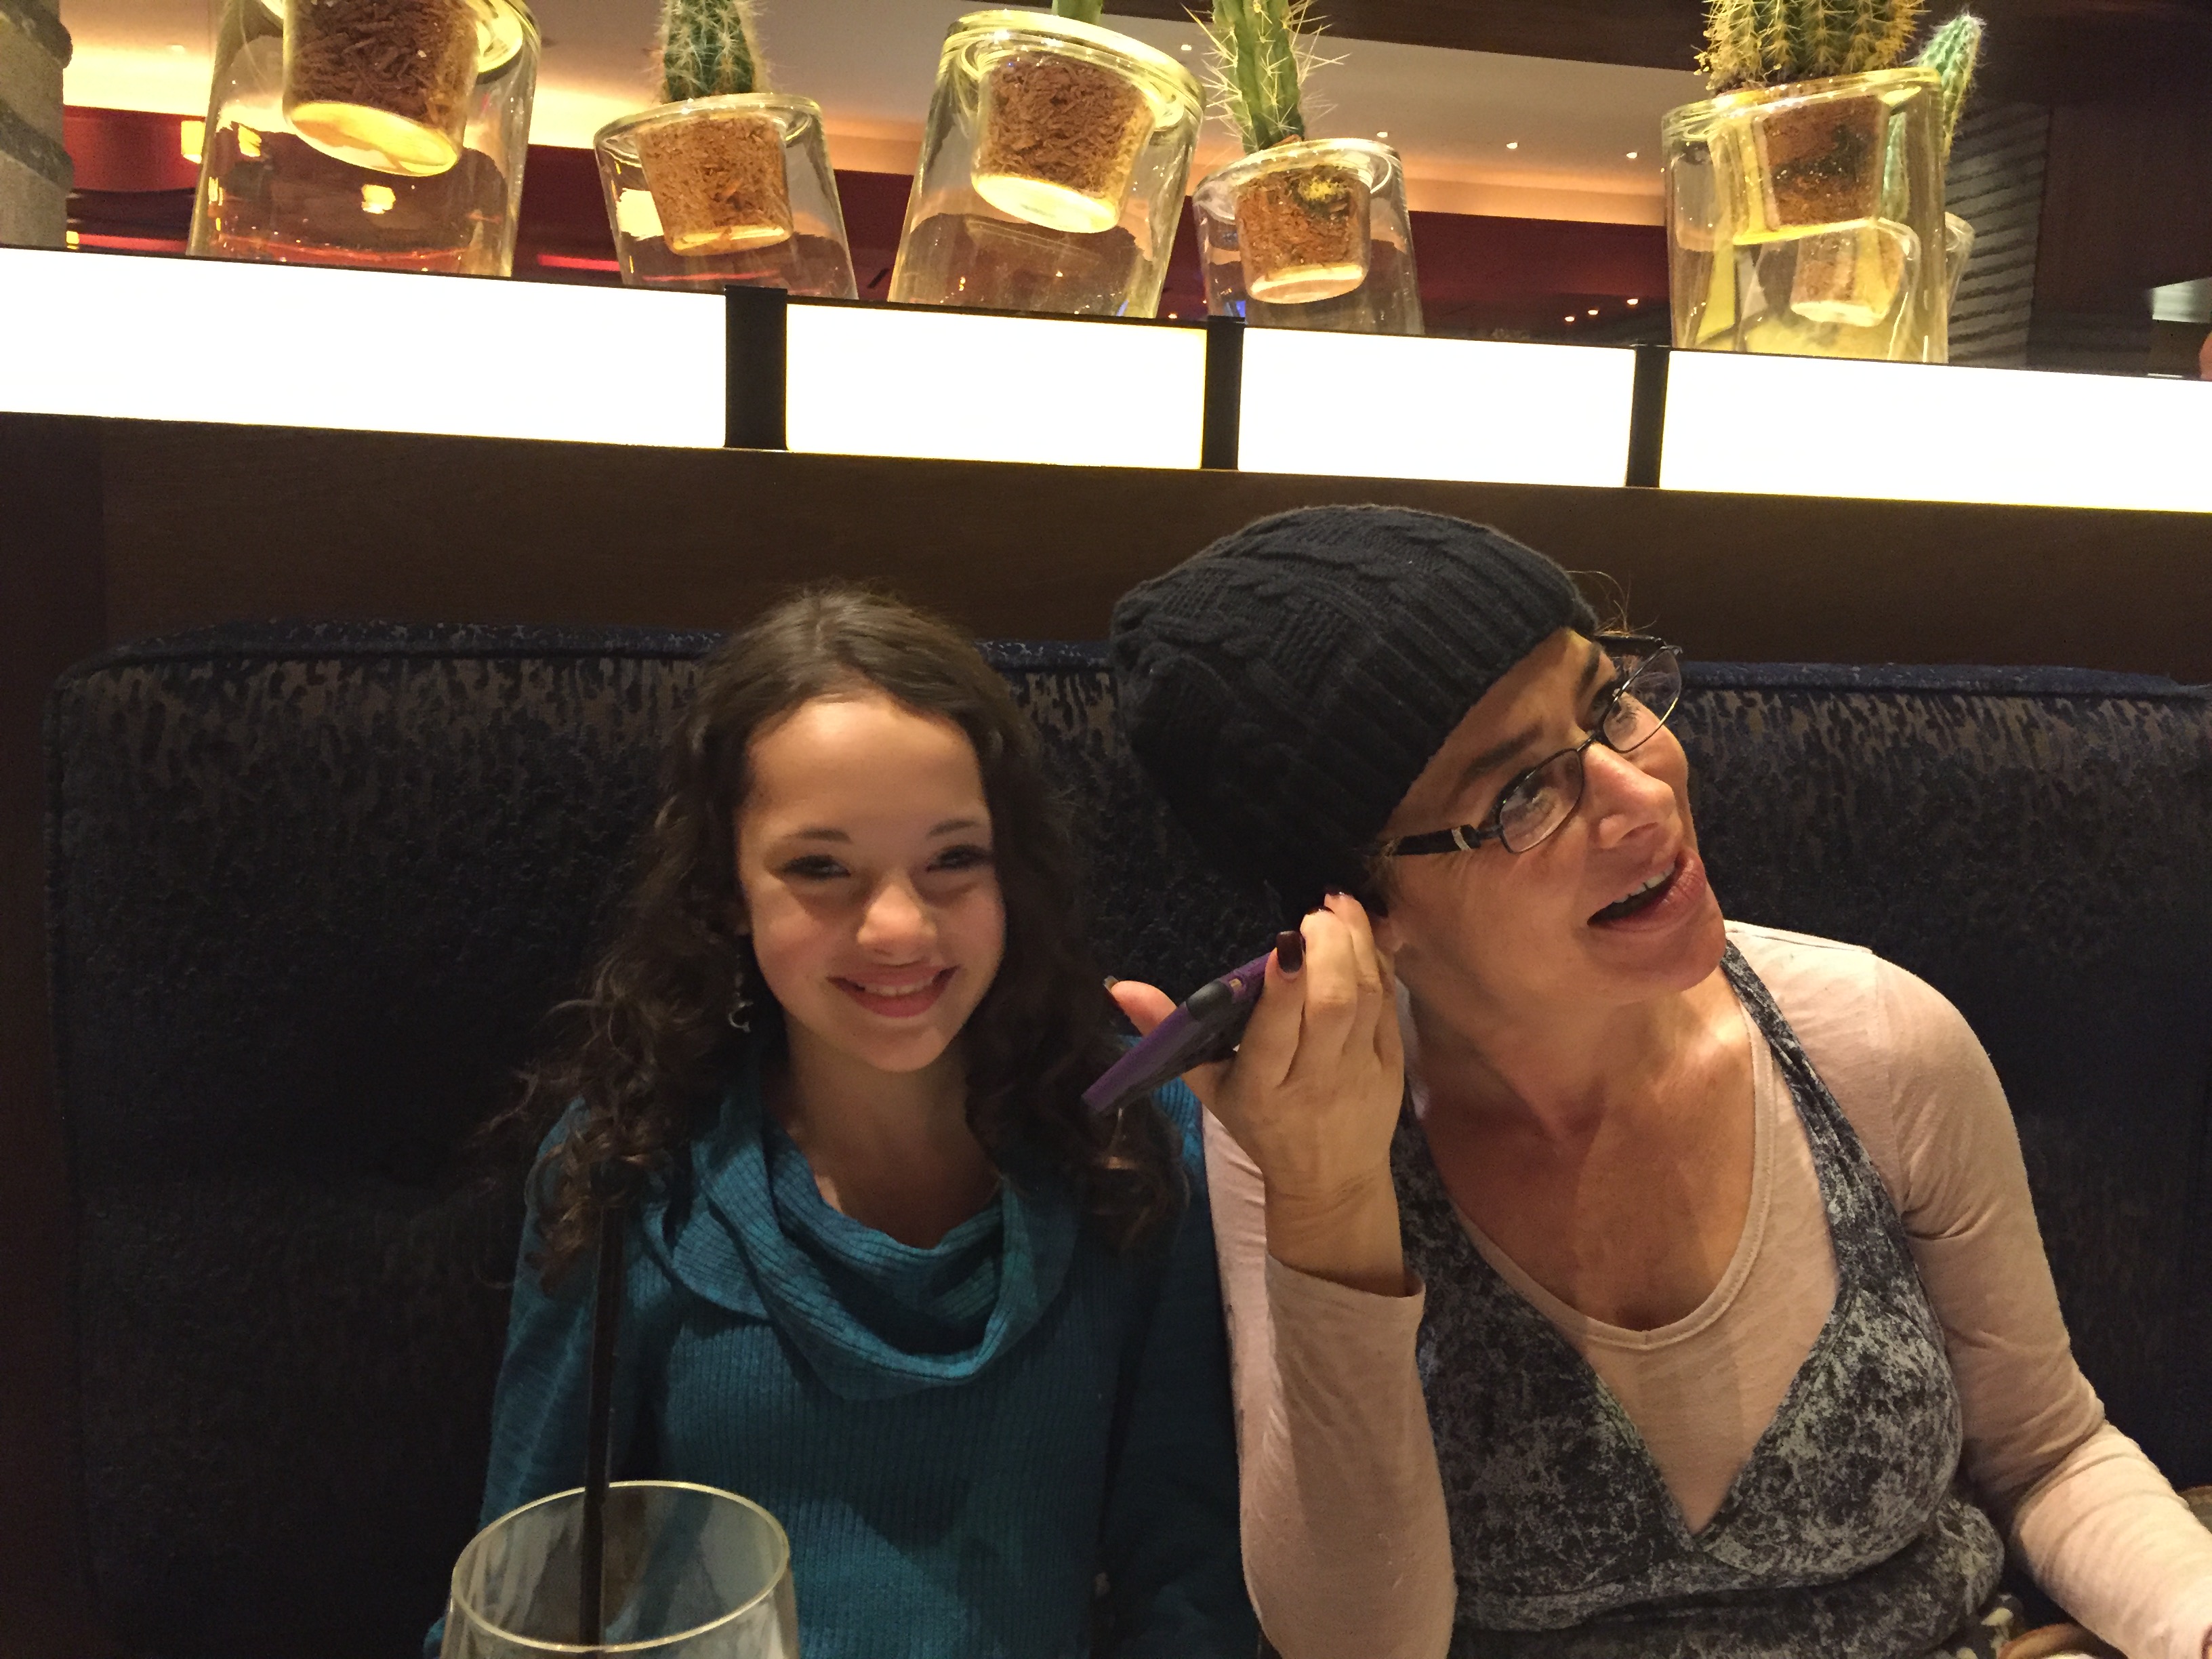 Actress Manda Madsen having dinner with Actress Claudia Wells from Back to the Future